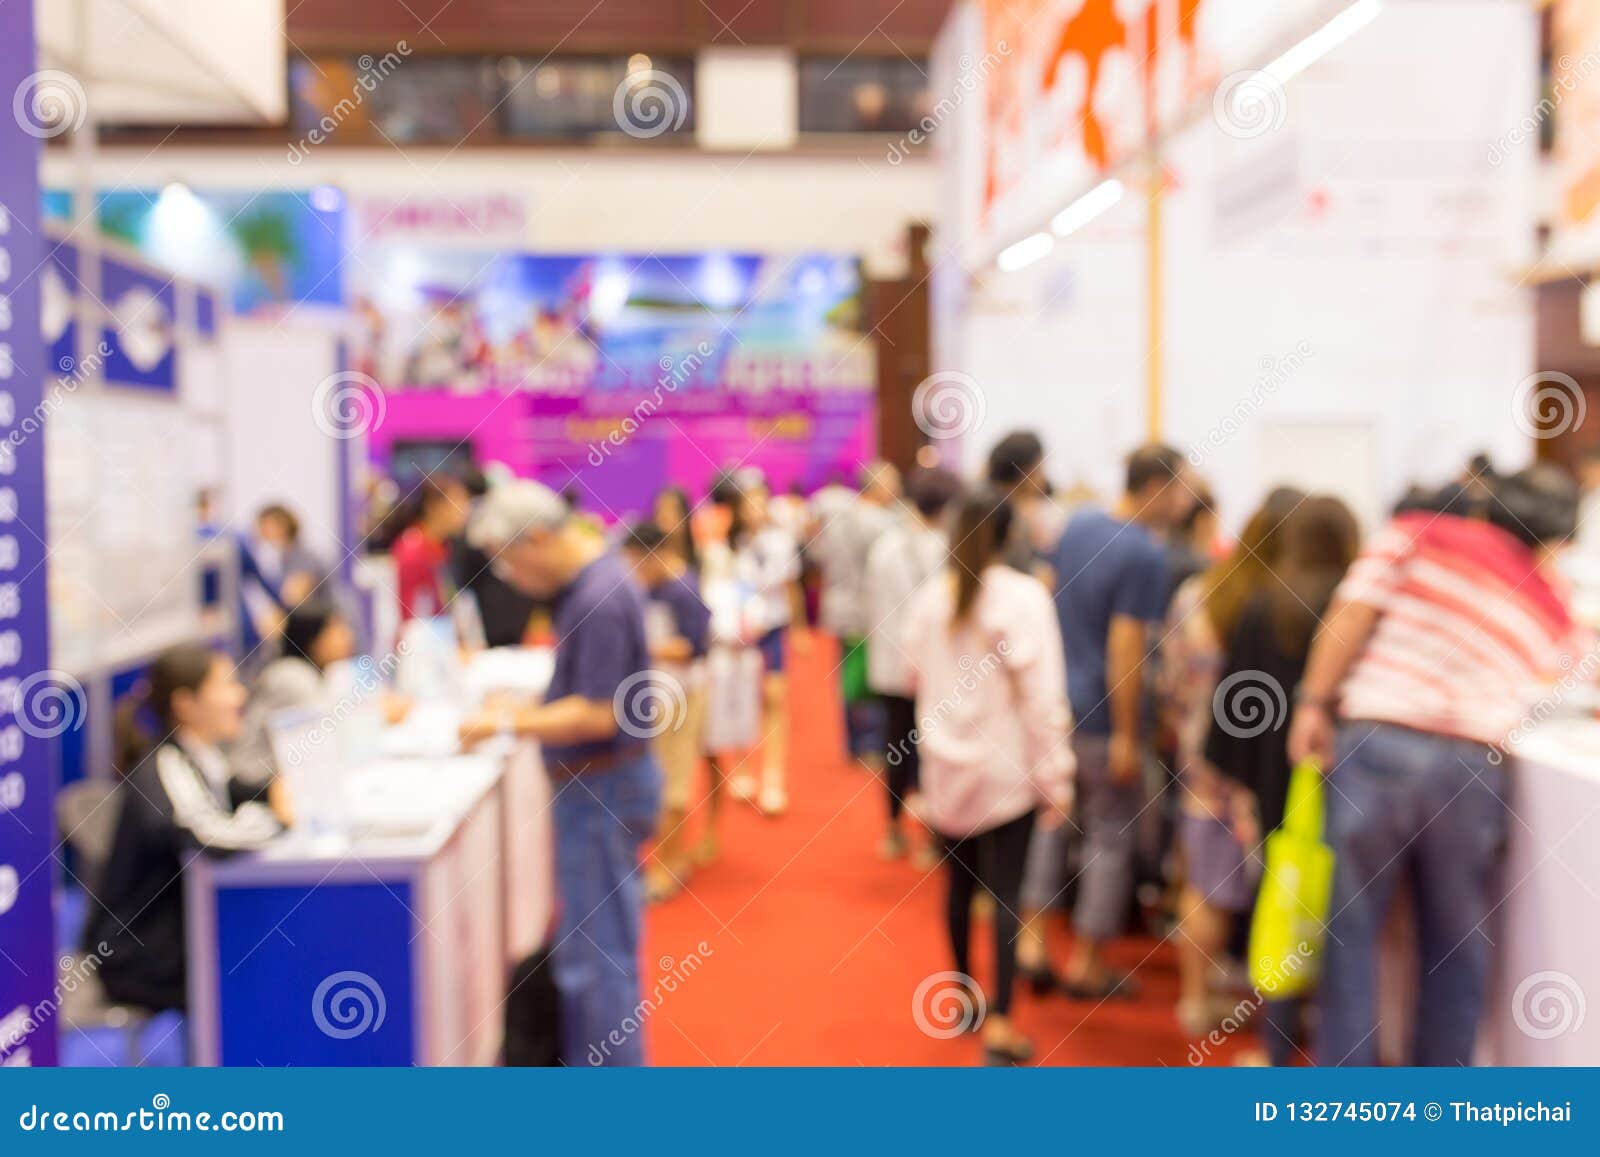 abstract blurred event exhibition with people background, business convention show concept.